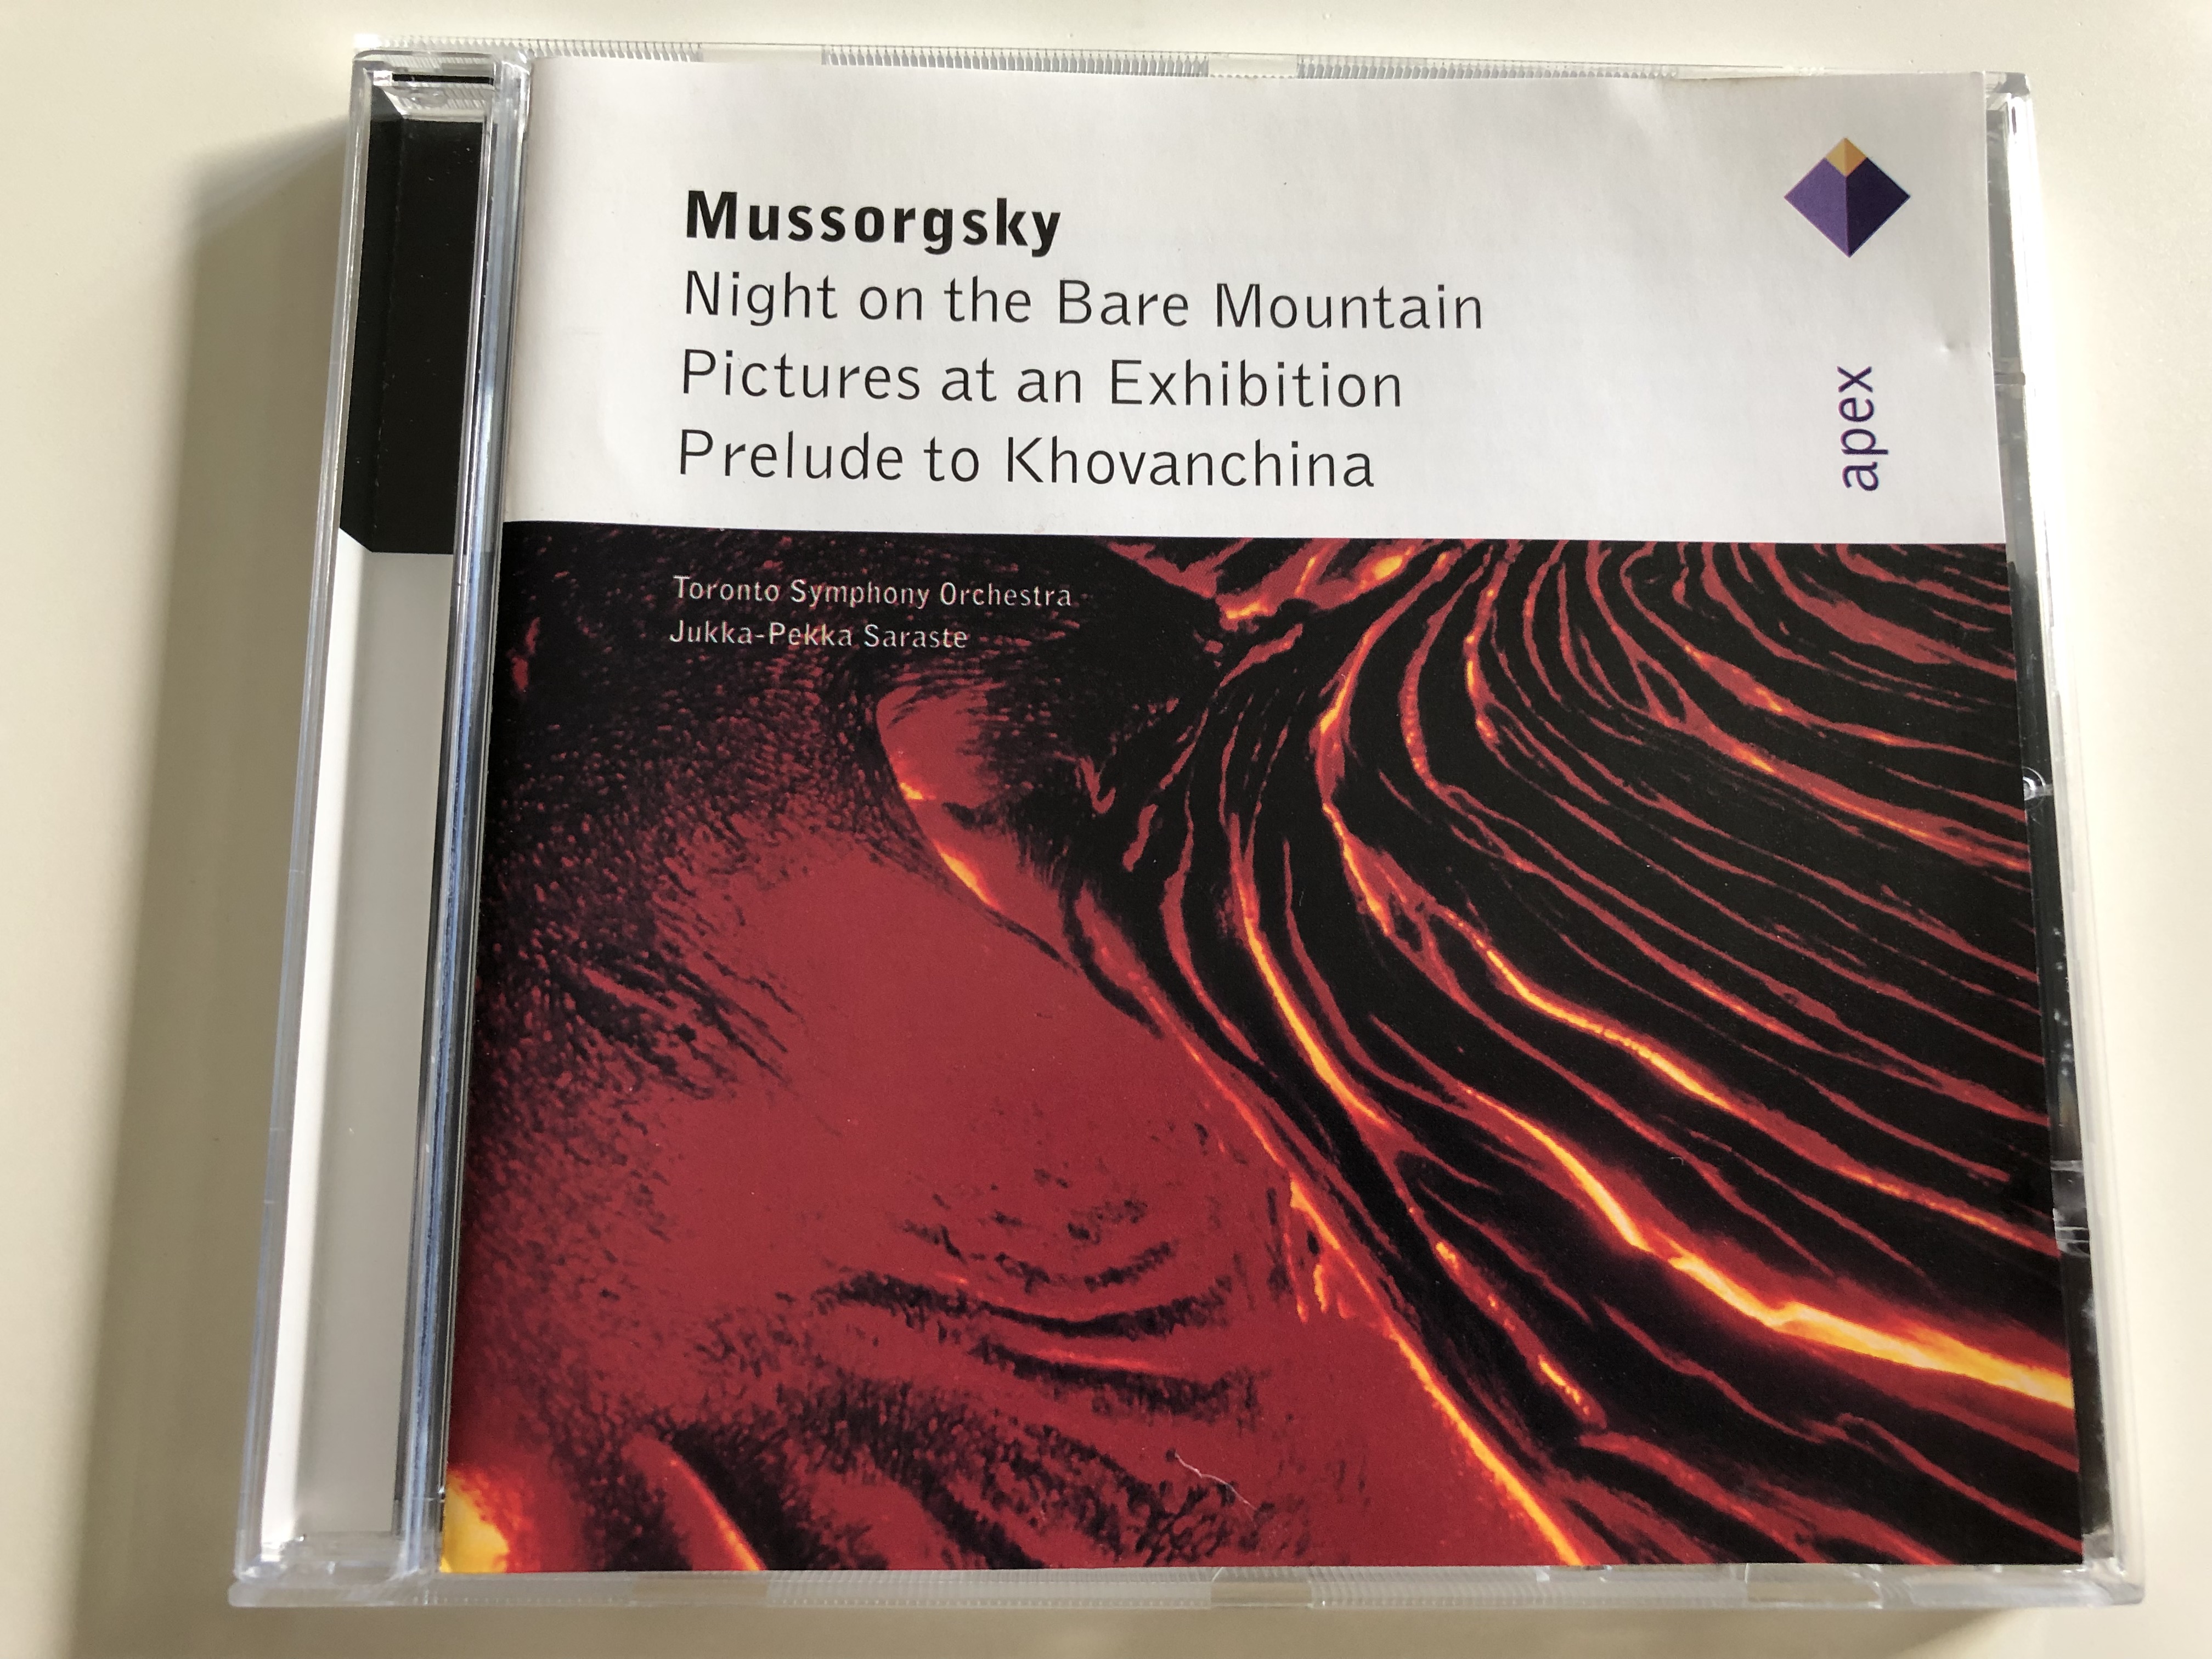 mussorgsky-night-on-the-bare-mountain-pictures-at-an-exhibition-prelude-to-khovanchina-toronto-symphony-orchestra-conducted-by-jukka-pekka-saraste-apex-audio-cd-1996-1-.jpg